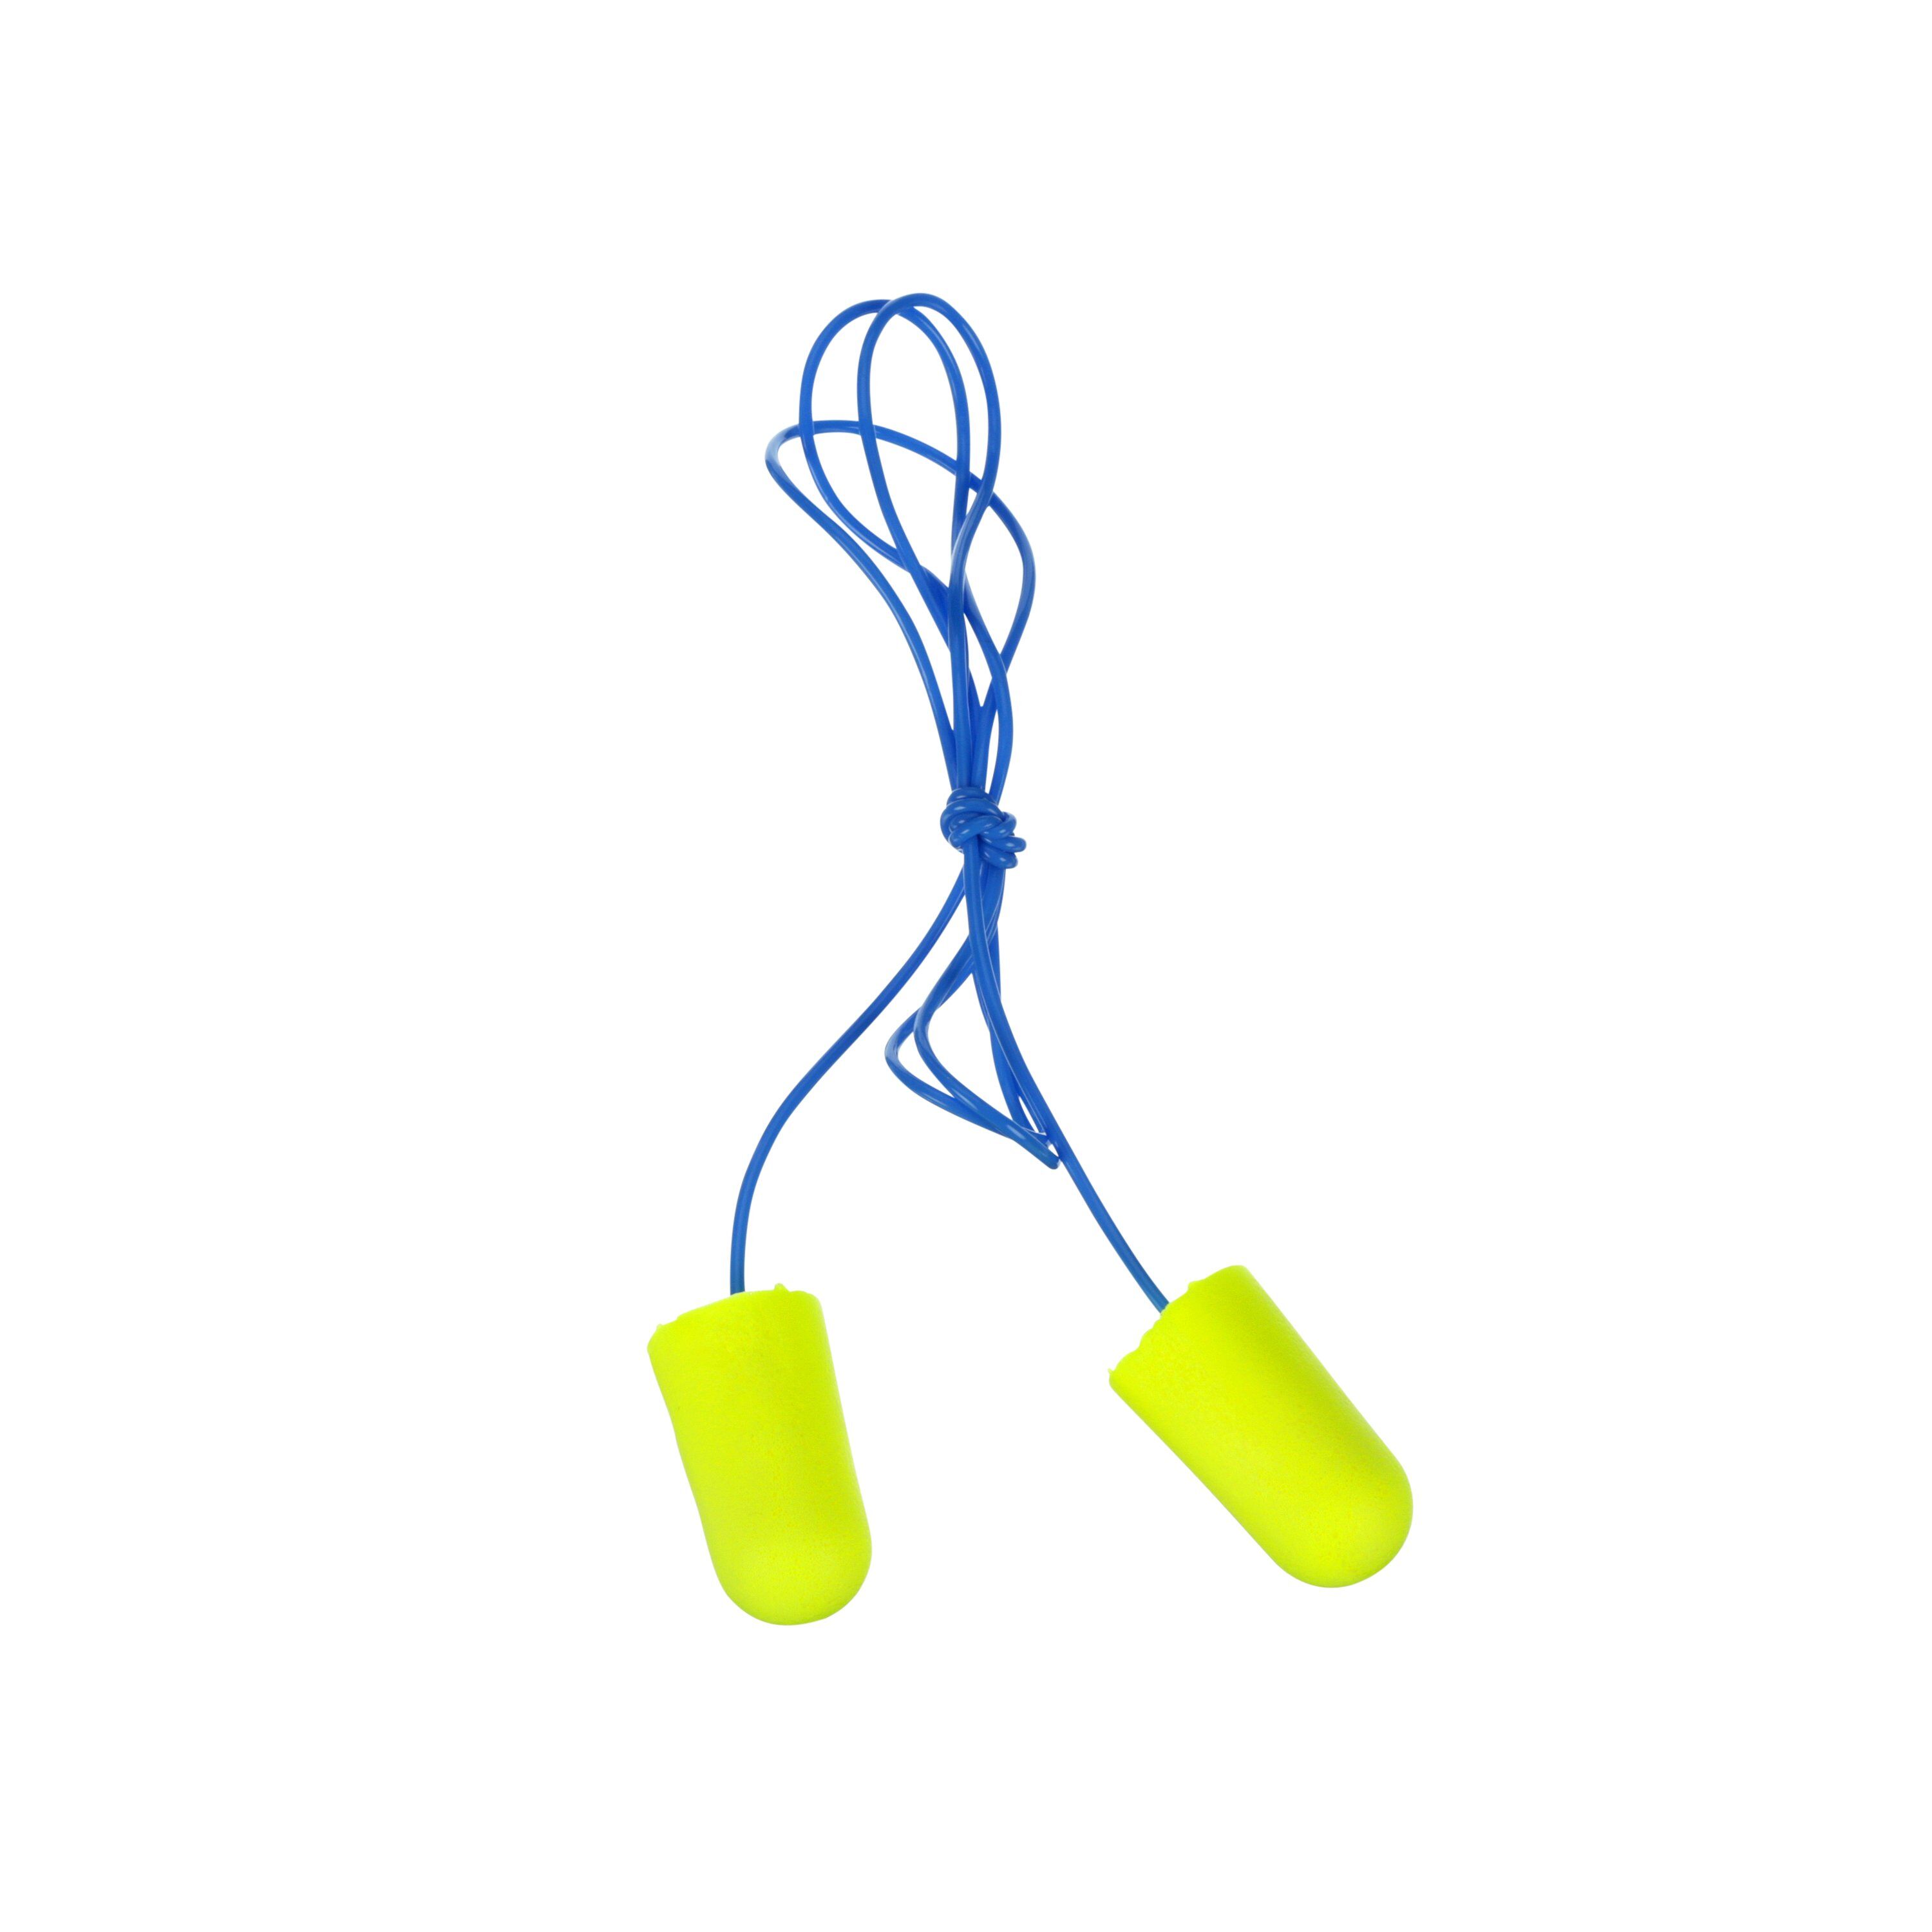 E-A-Rsoft™ 311-1251 Neons™ Earplugs, 33 dB Noise Reduction, Tapered Shape, CSA Class AL, Disposable, Corded Design